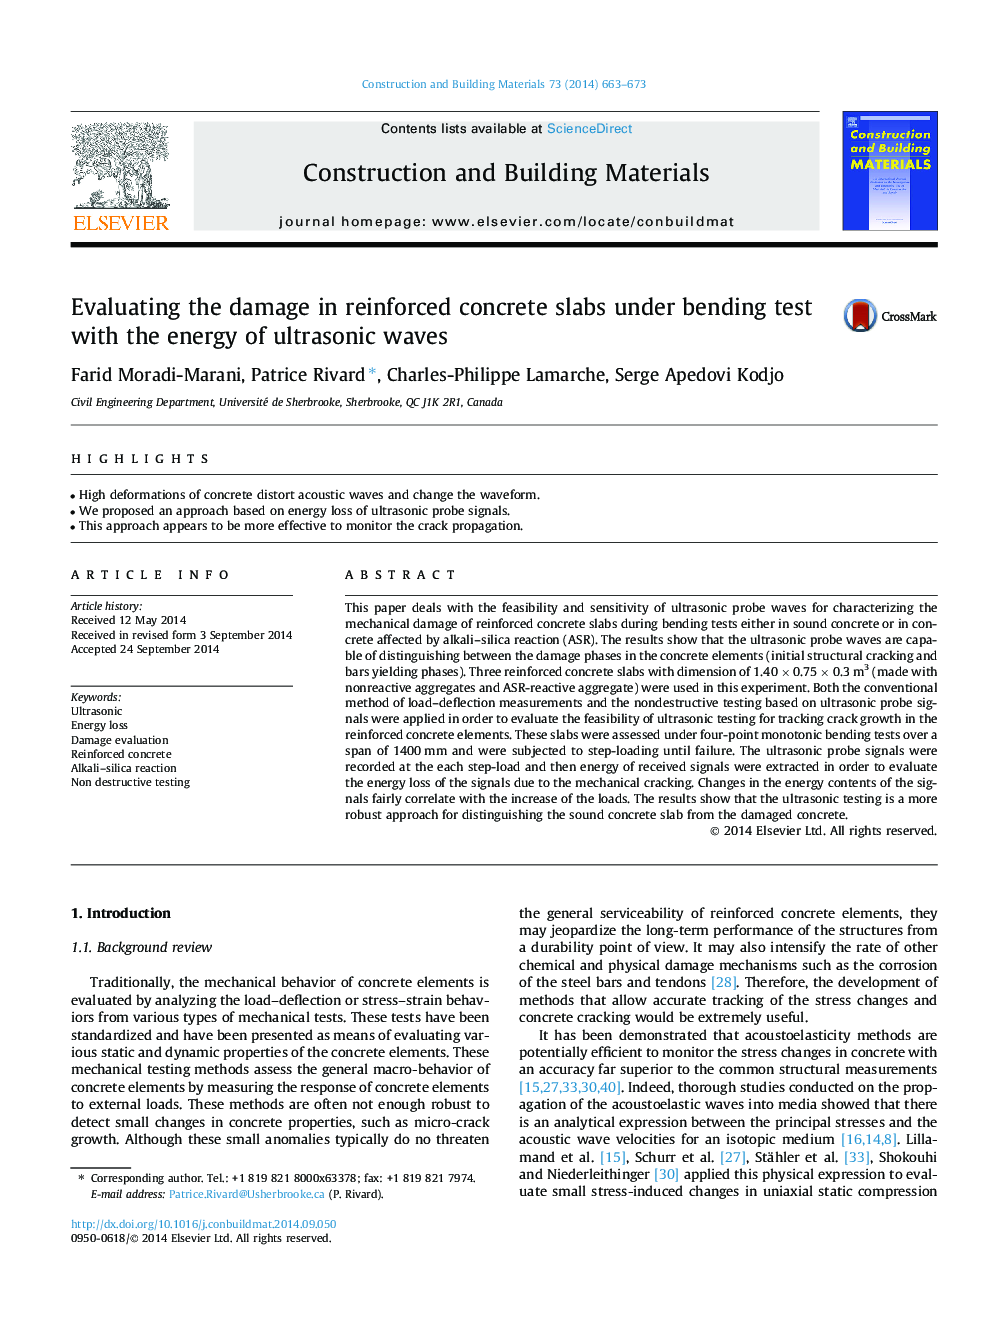 Evaluating the damage in reinforced concrete slabs under bending test with the energy of ultrasonic waves